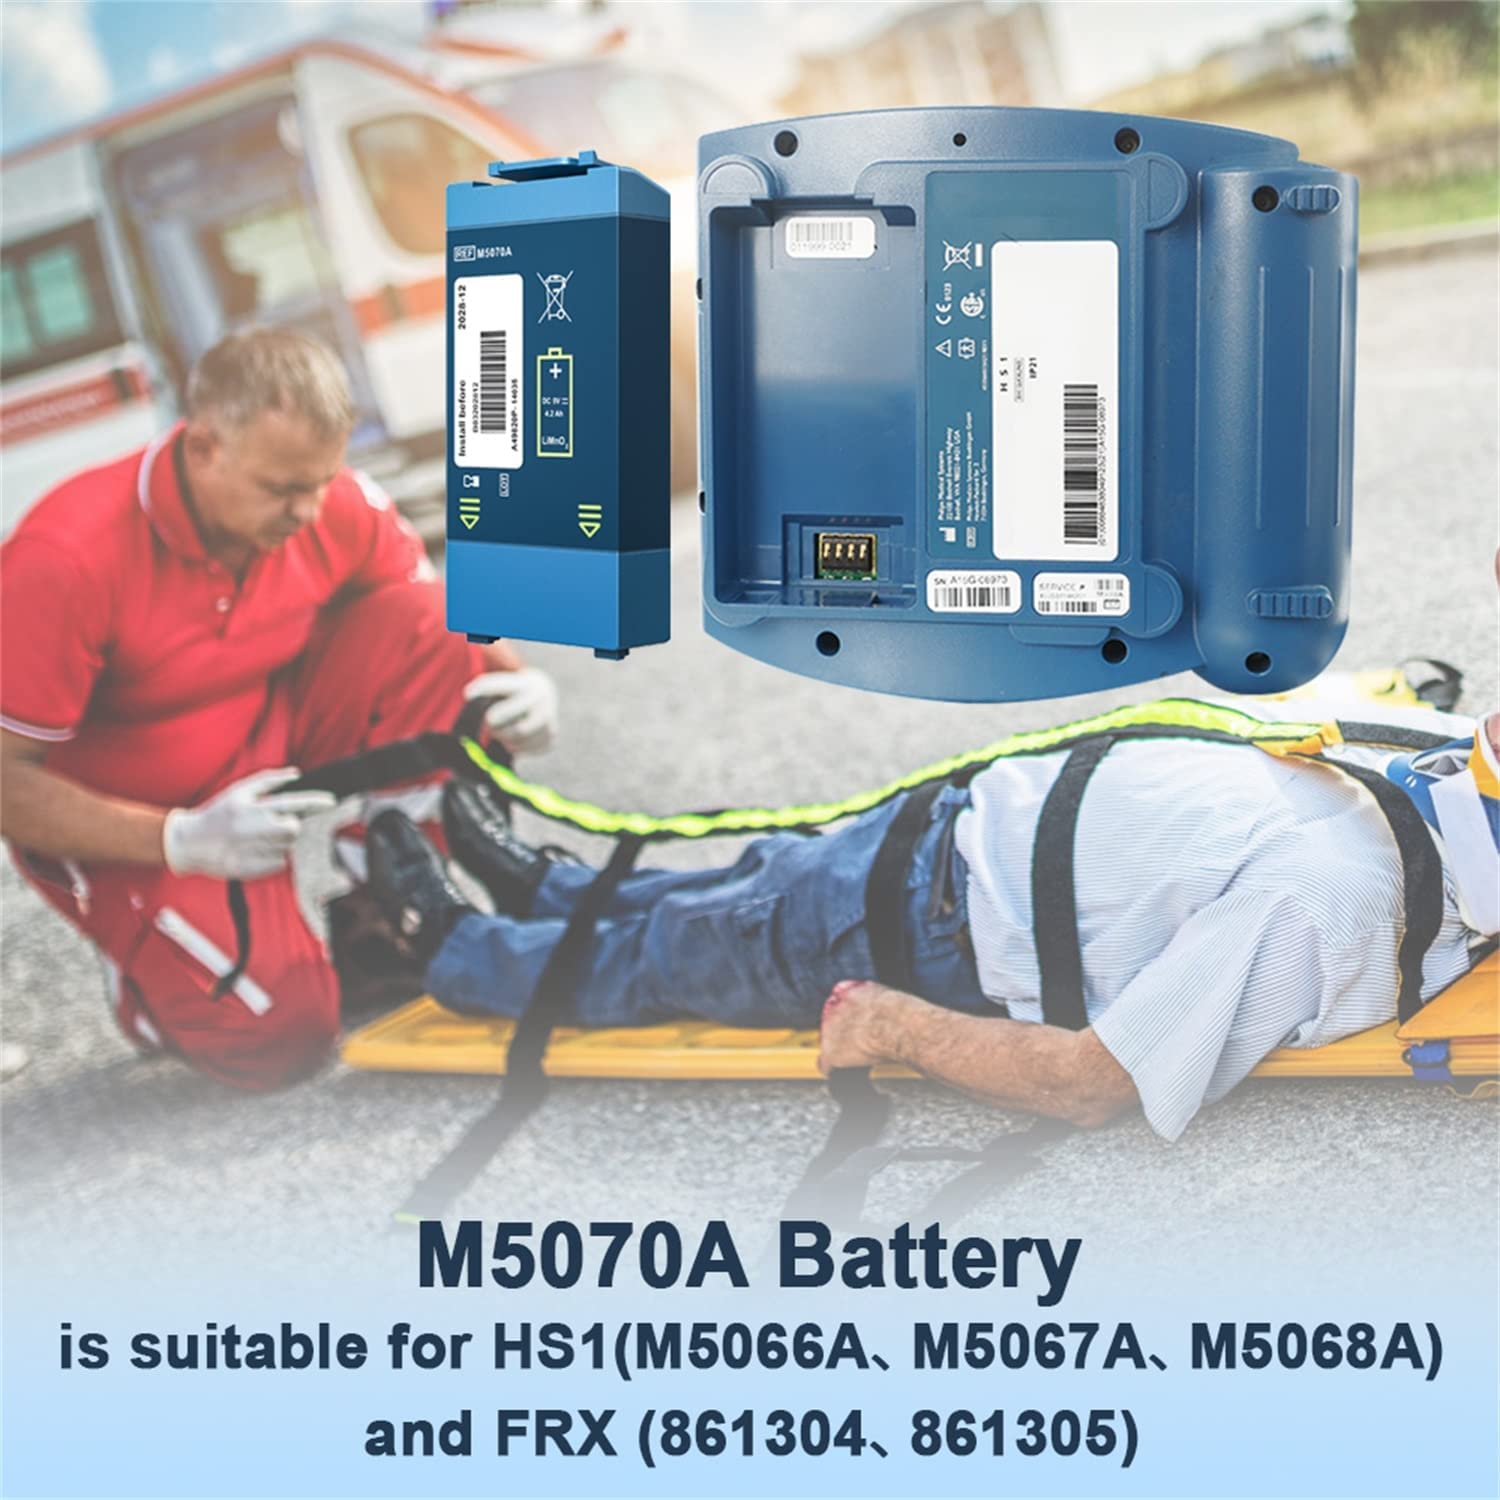 Zeemey M5070A Battery Defibrillator Battery AED Battery Replacement 9V 4.2Ah Home and OnSite AED Defibrillator Replacement Battery High Capacity